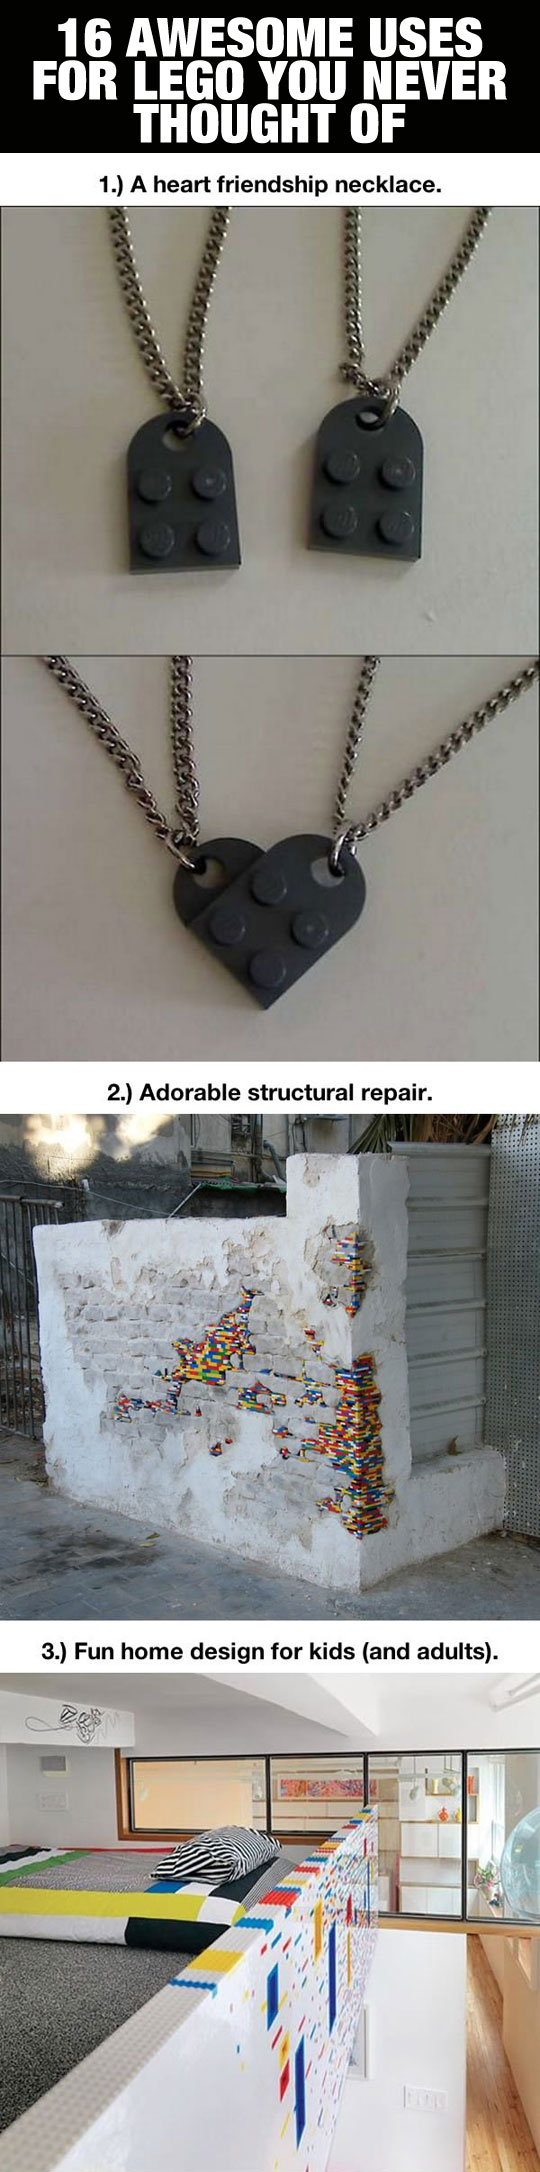 Awesome uses for LEGO you never thought of...